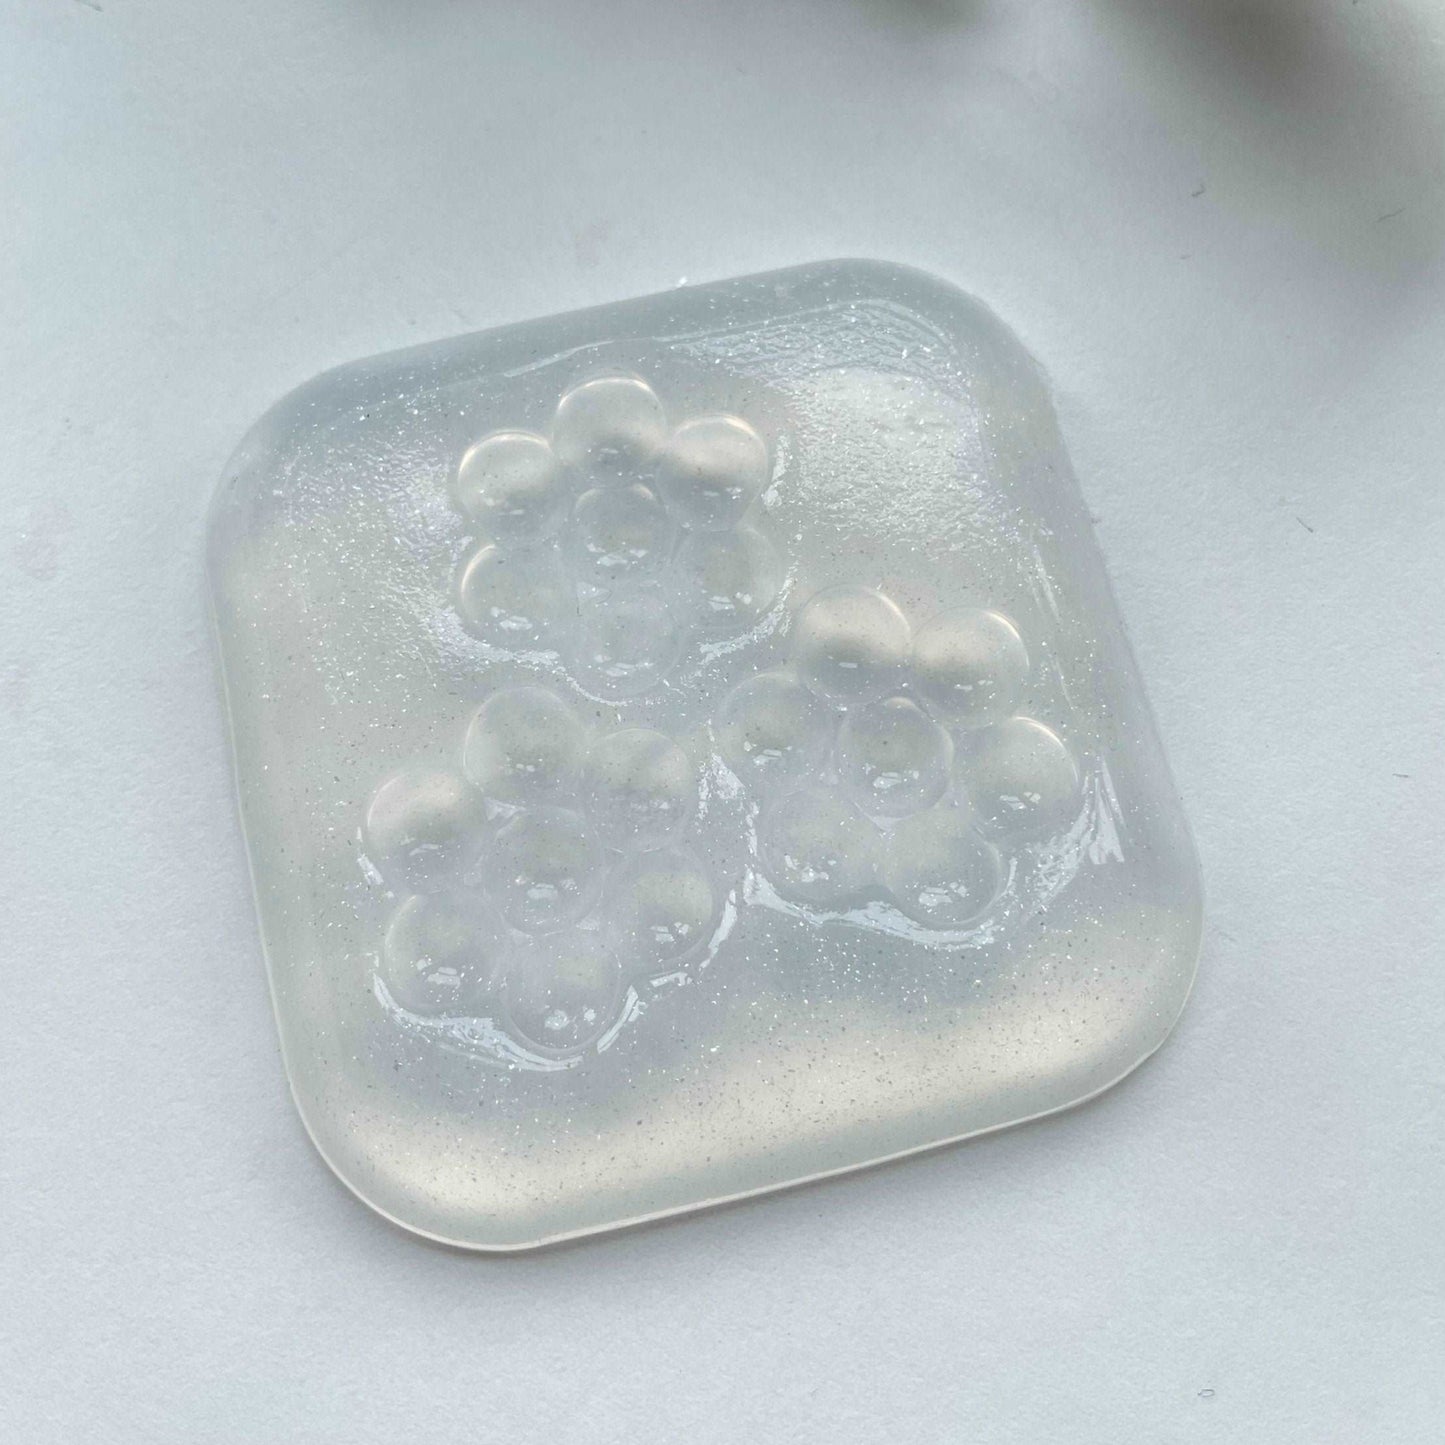 3 Flower Bubble Jewelry Mold Transparent Silicone Mold Resin molds for pendants, earrings, necklaces, rings, jewelry making DIY...bijouterie